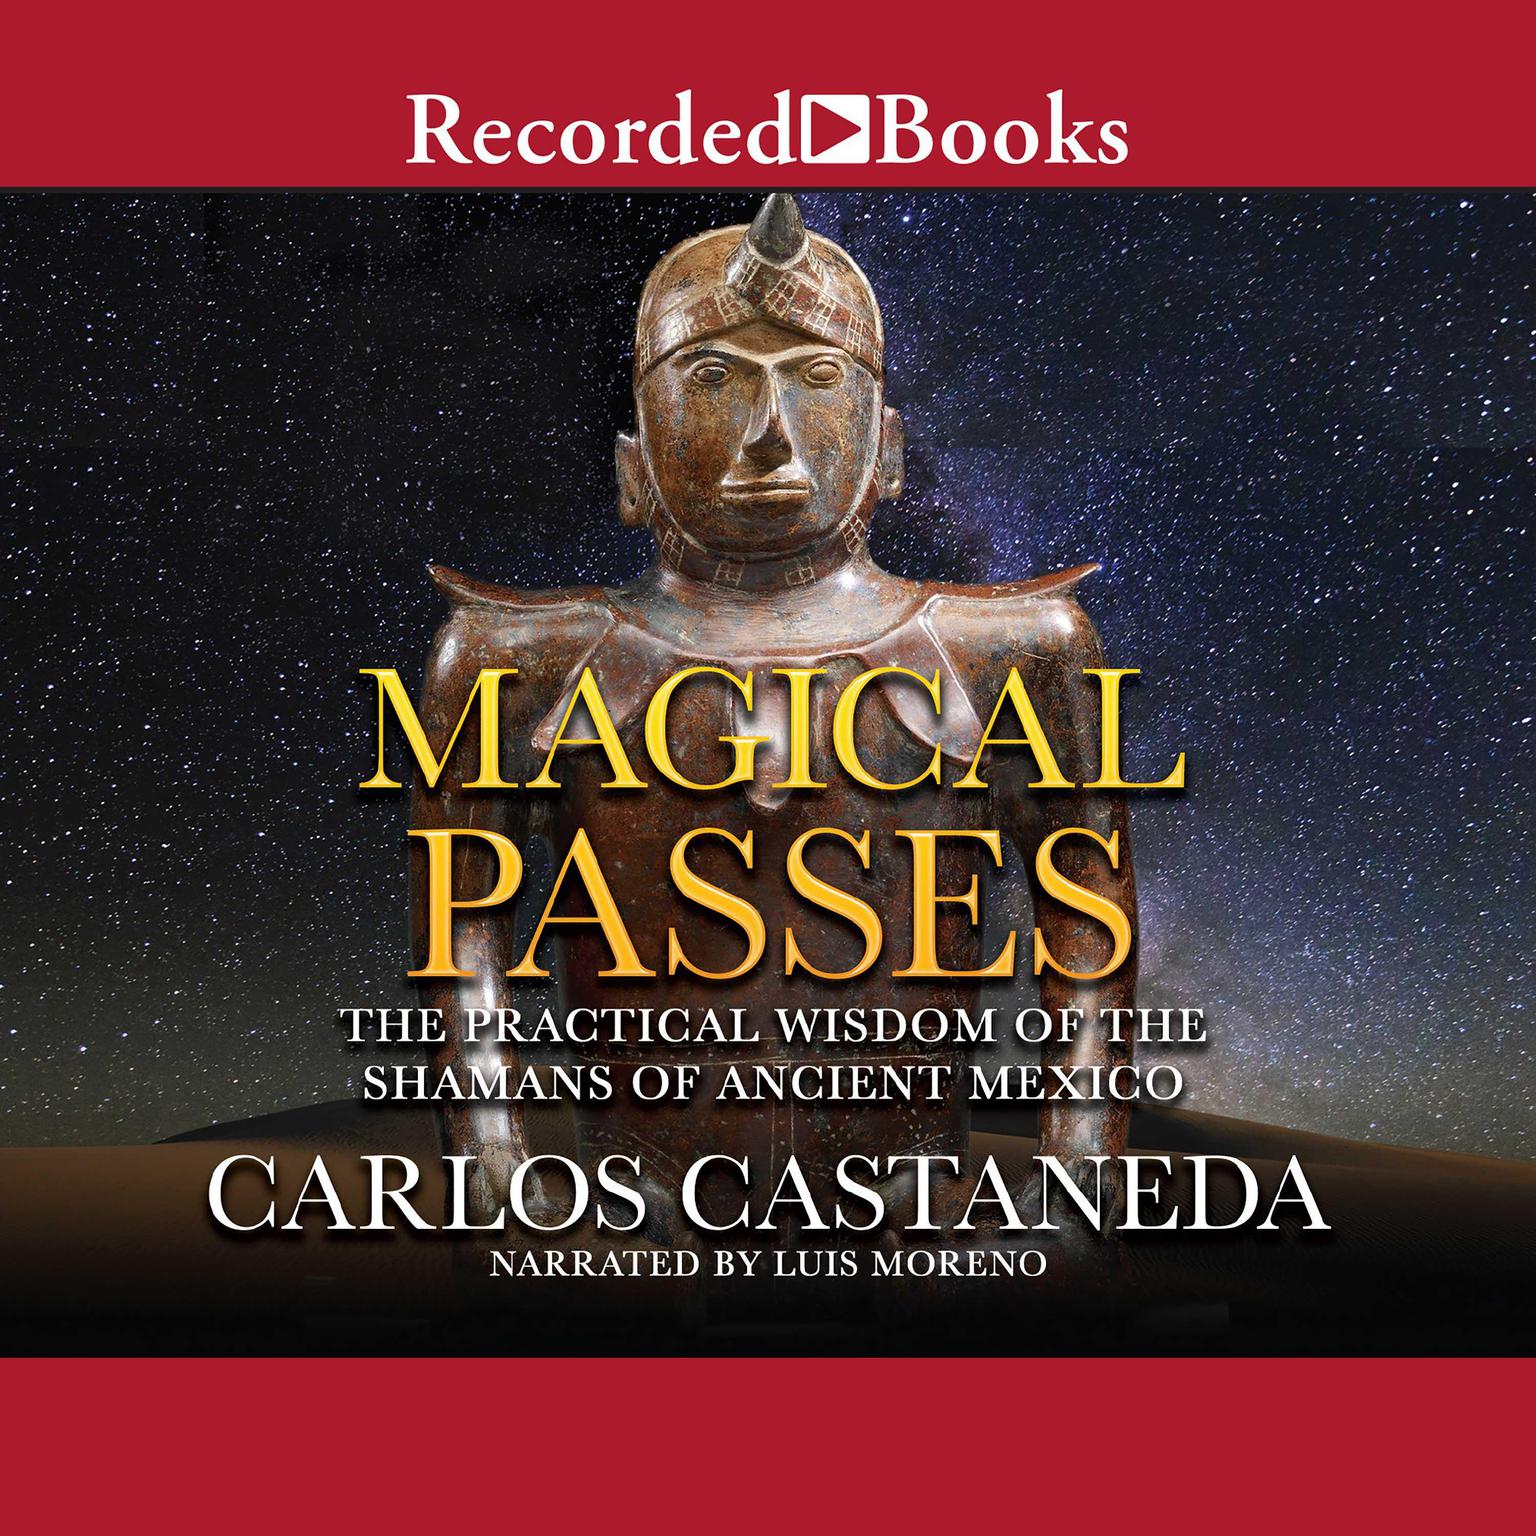 Magical Passes: The Practical Wisdom of the Shamans of Ancient Mexico Audiobook, by Carlos Castaneda